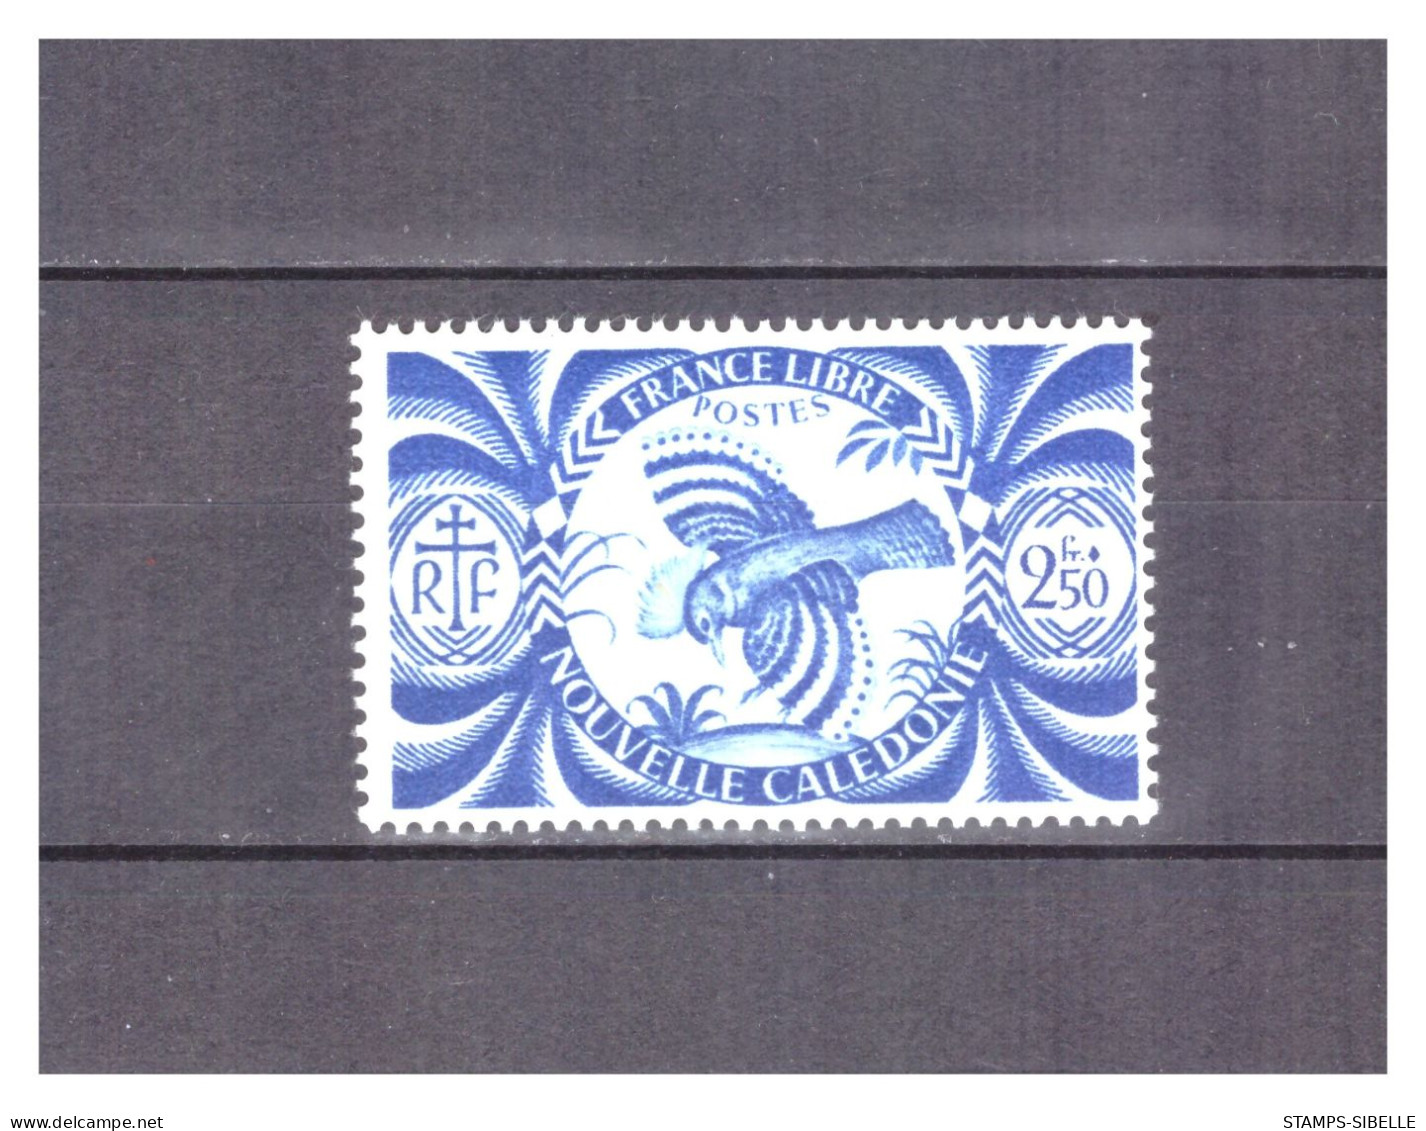 NOUVELLE  CALEDONIE   . N °  239  . 2  F50   OUTREMER     NEUF    ** . SUPERBE . - Unused Stamps